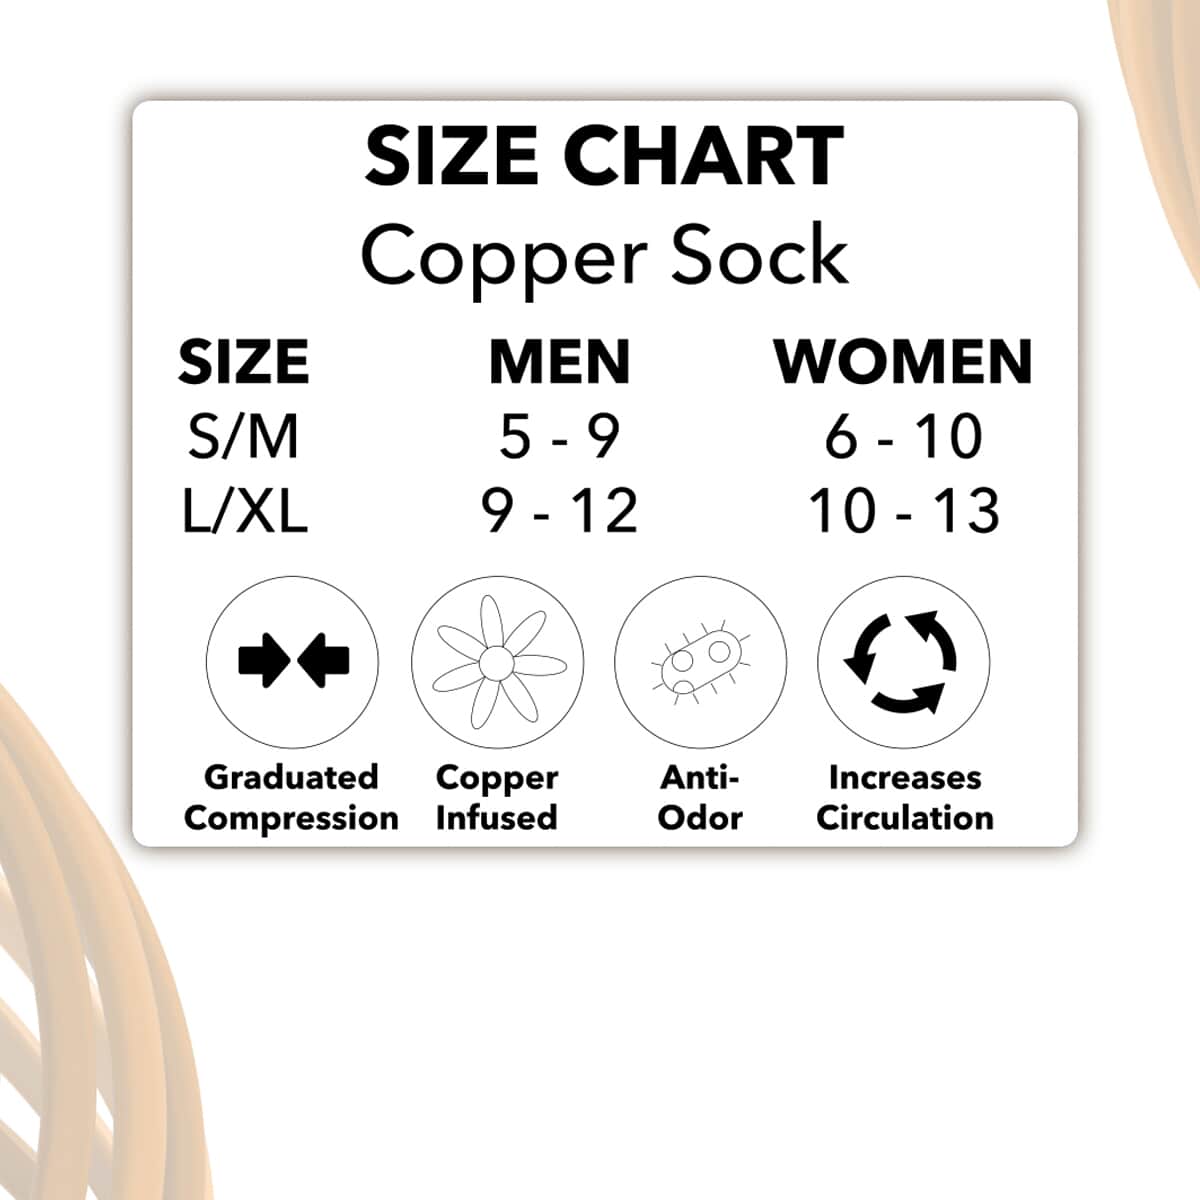 Set of 4 Pairs of Ankle Length Odor Free Copper Compression Socks For Men And Women, Premium Material Moisture Wicking Unisex Copper Infused Socks - Lavender, Teal, Beige, Wine (L/XL) image number 5